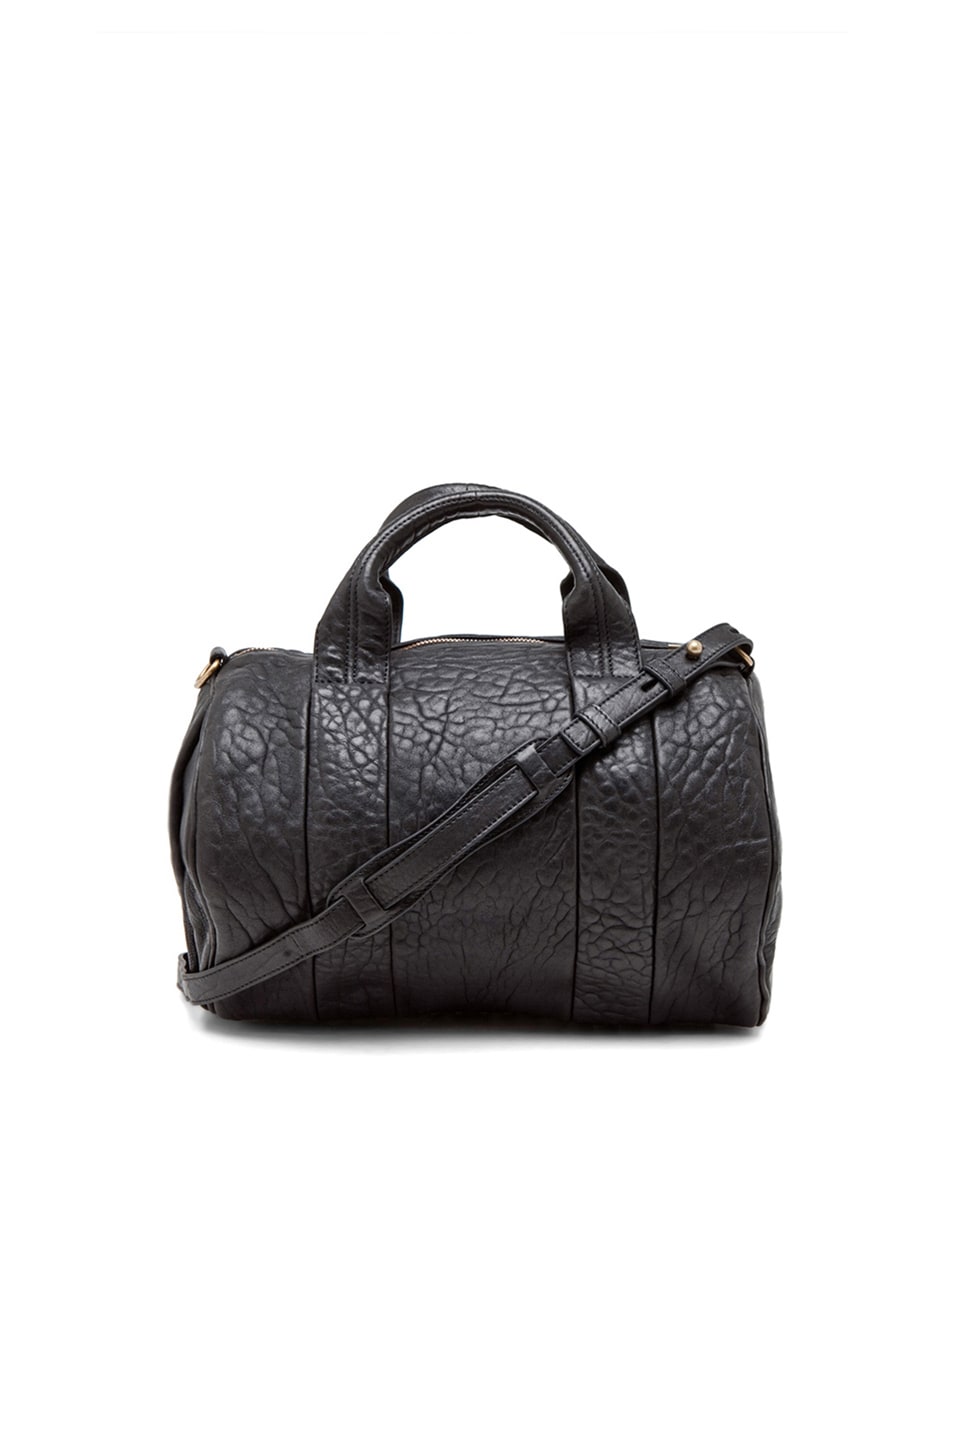 Image 1 of Alexander Wang Rocco Satchel with Gold Hardware in Black